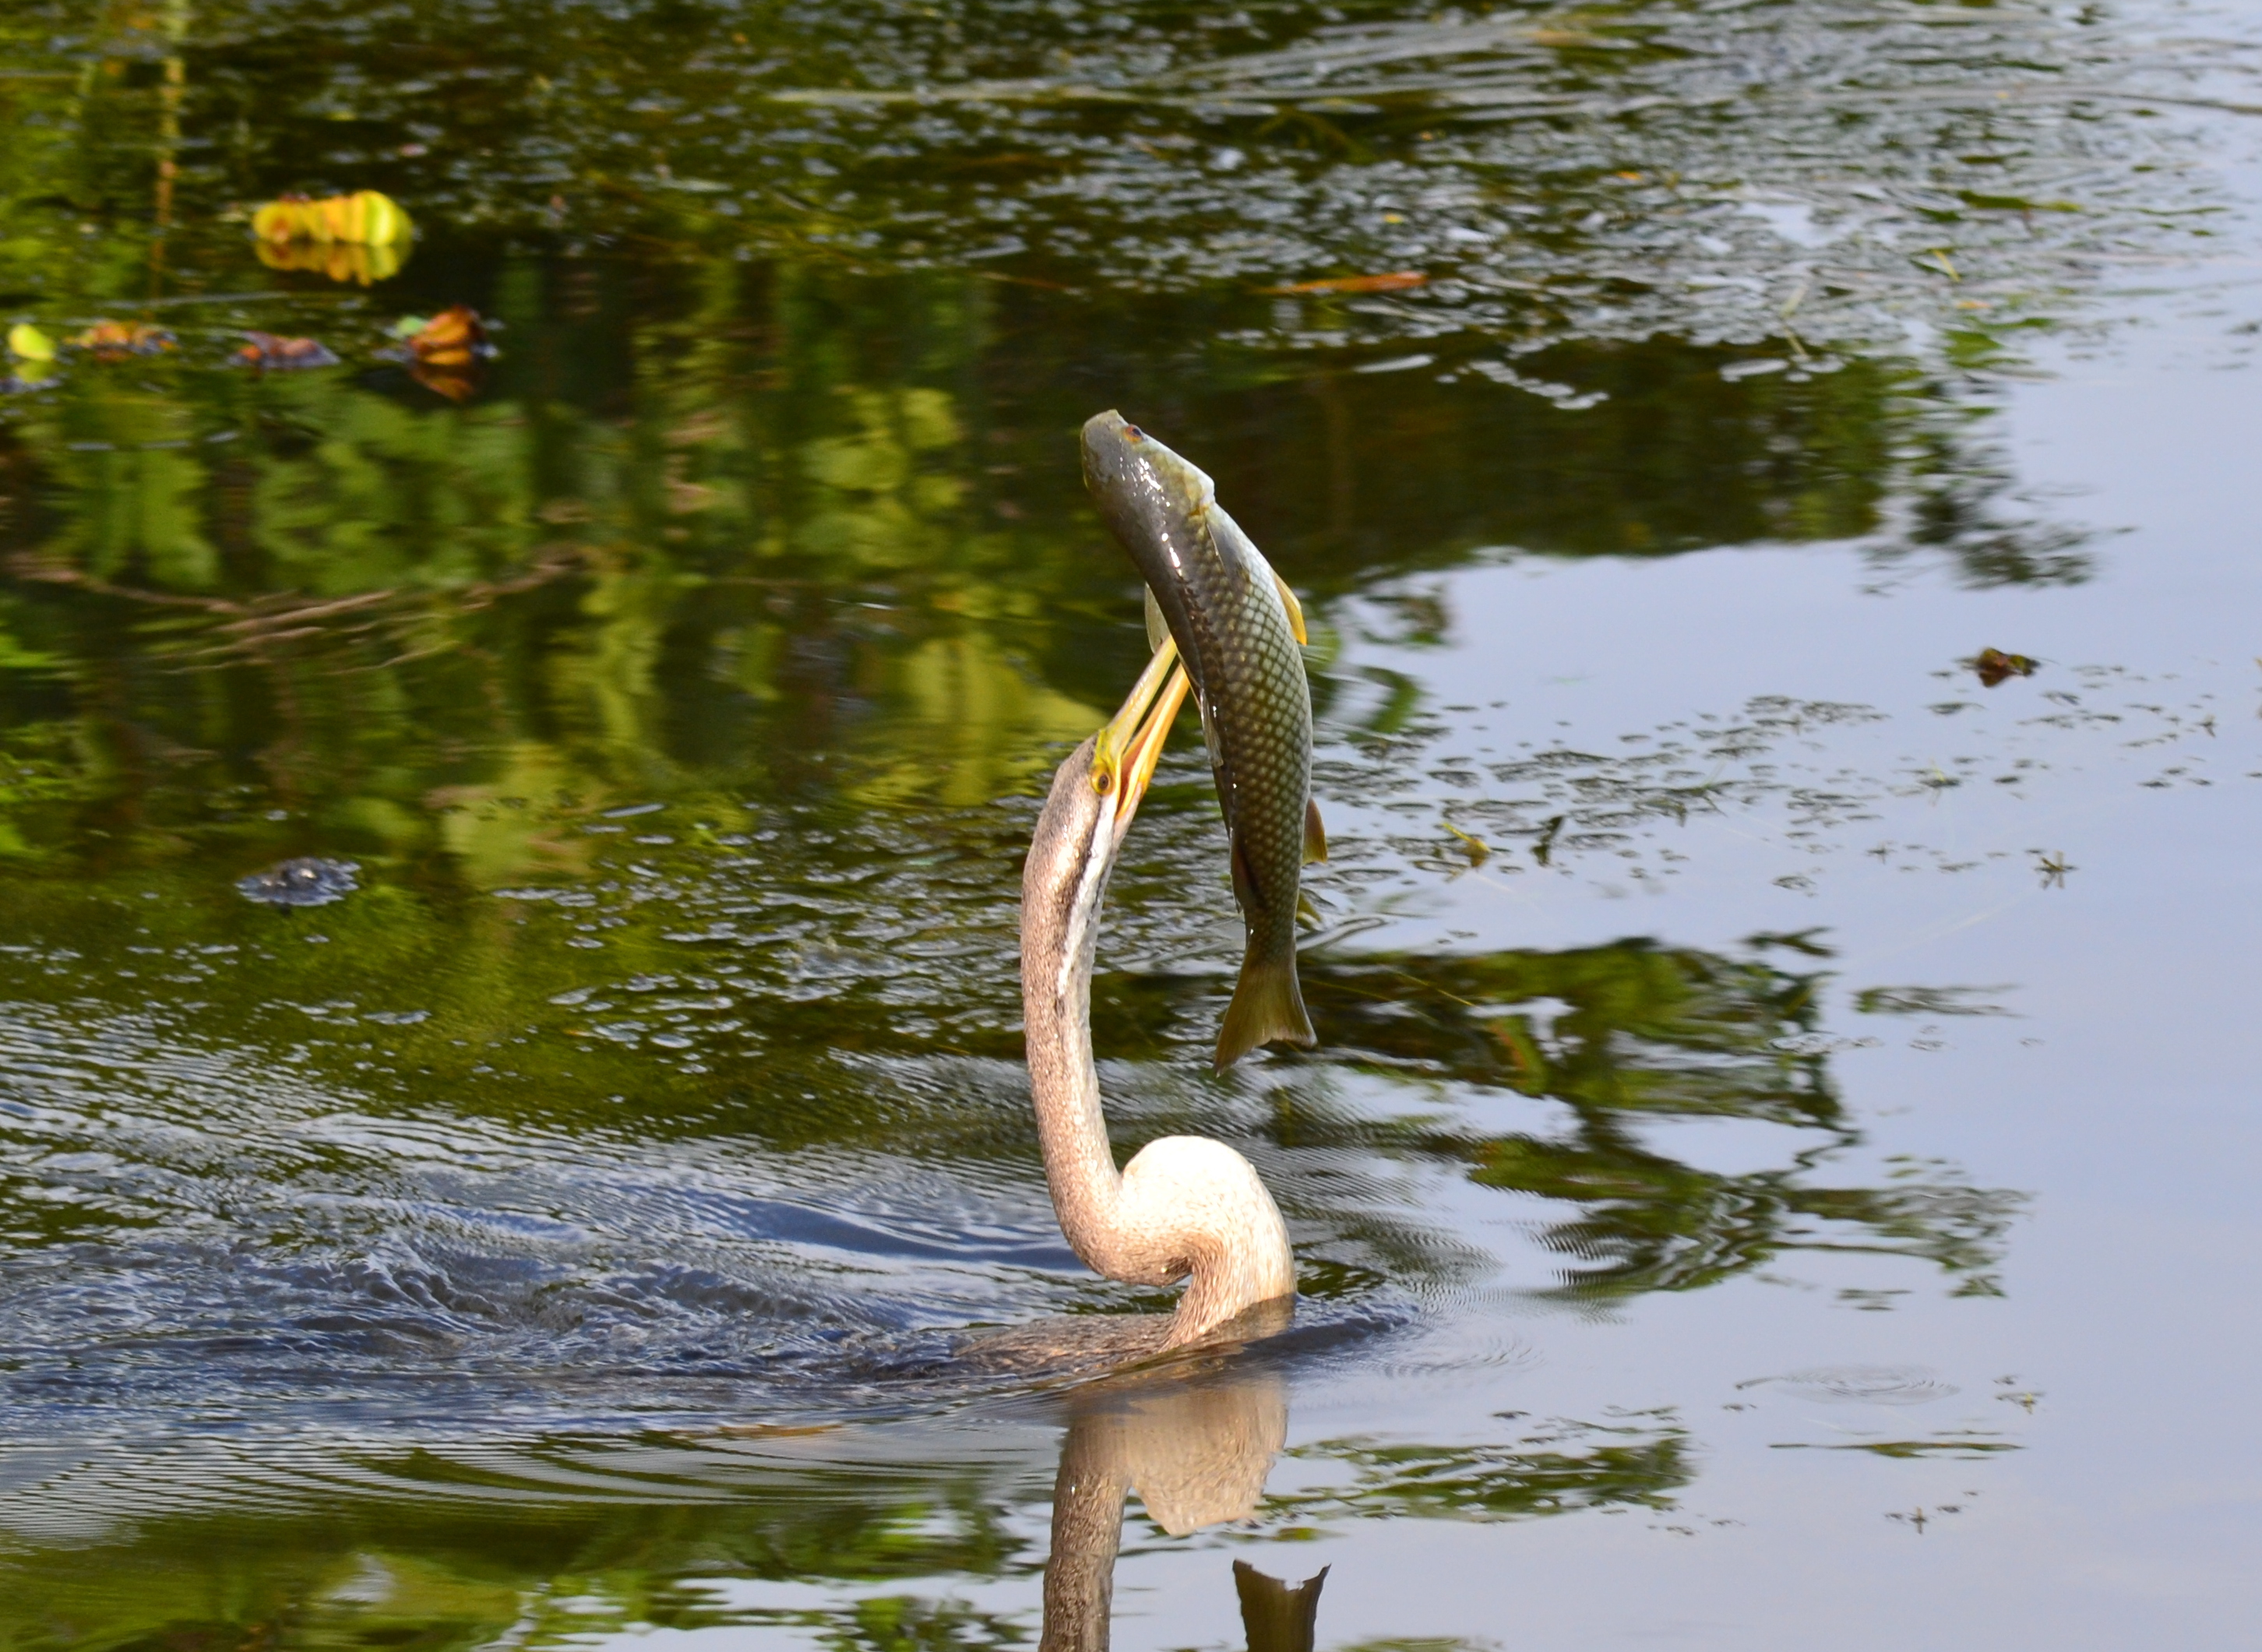 Female Australasian Darter about to swallow a fish © Arne Wessels